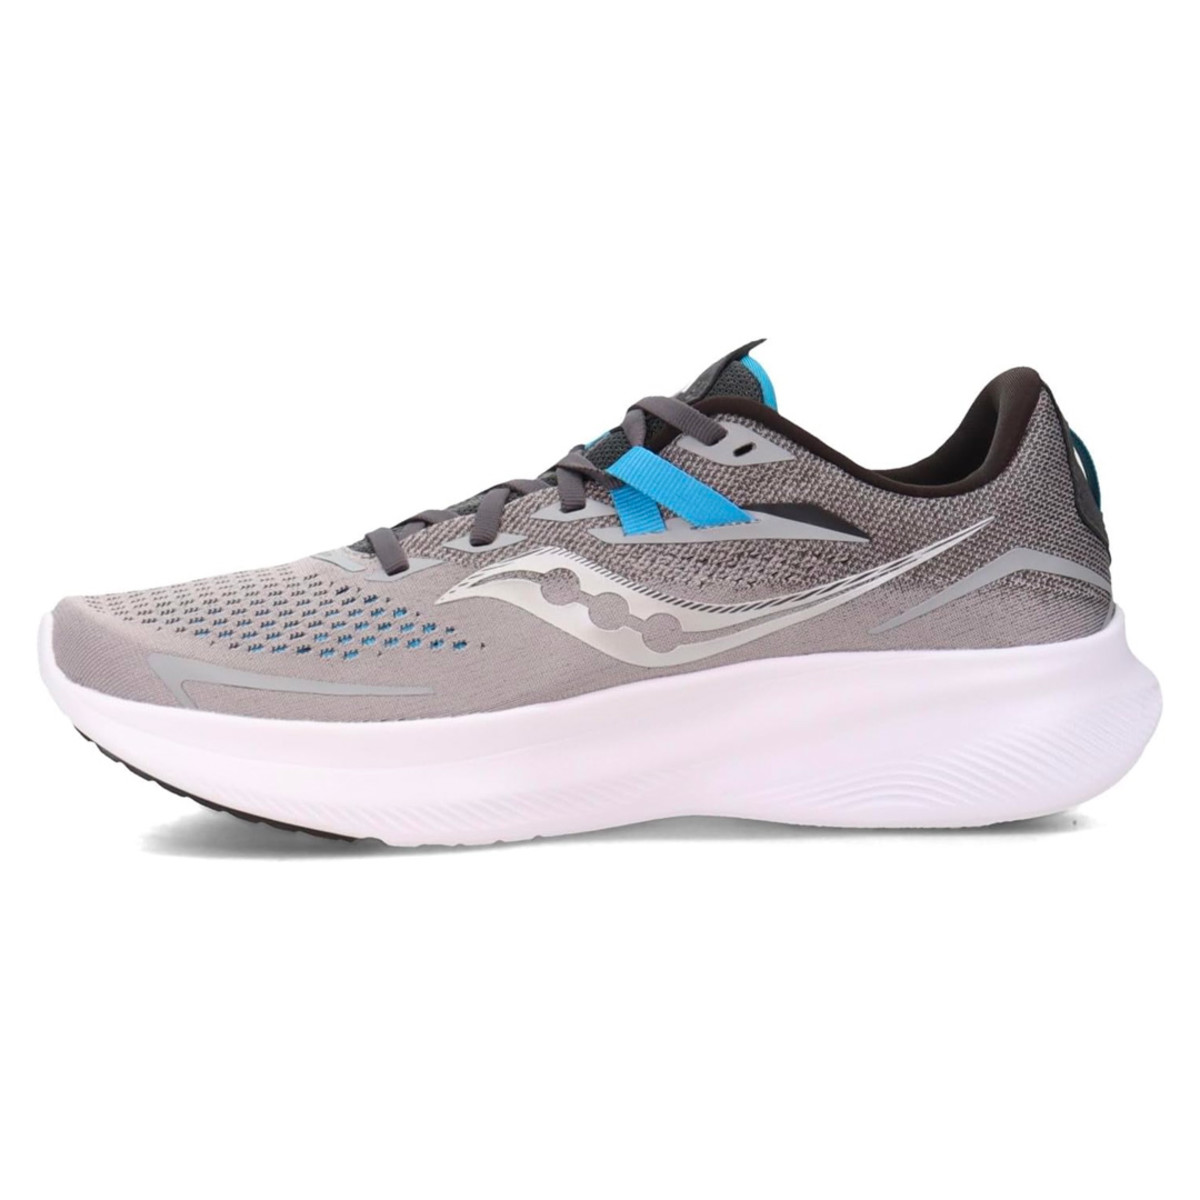 The Saucony Ride 15 Running Shoe Is Up to 65% Off on Amazon - Men's Journal